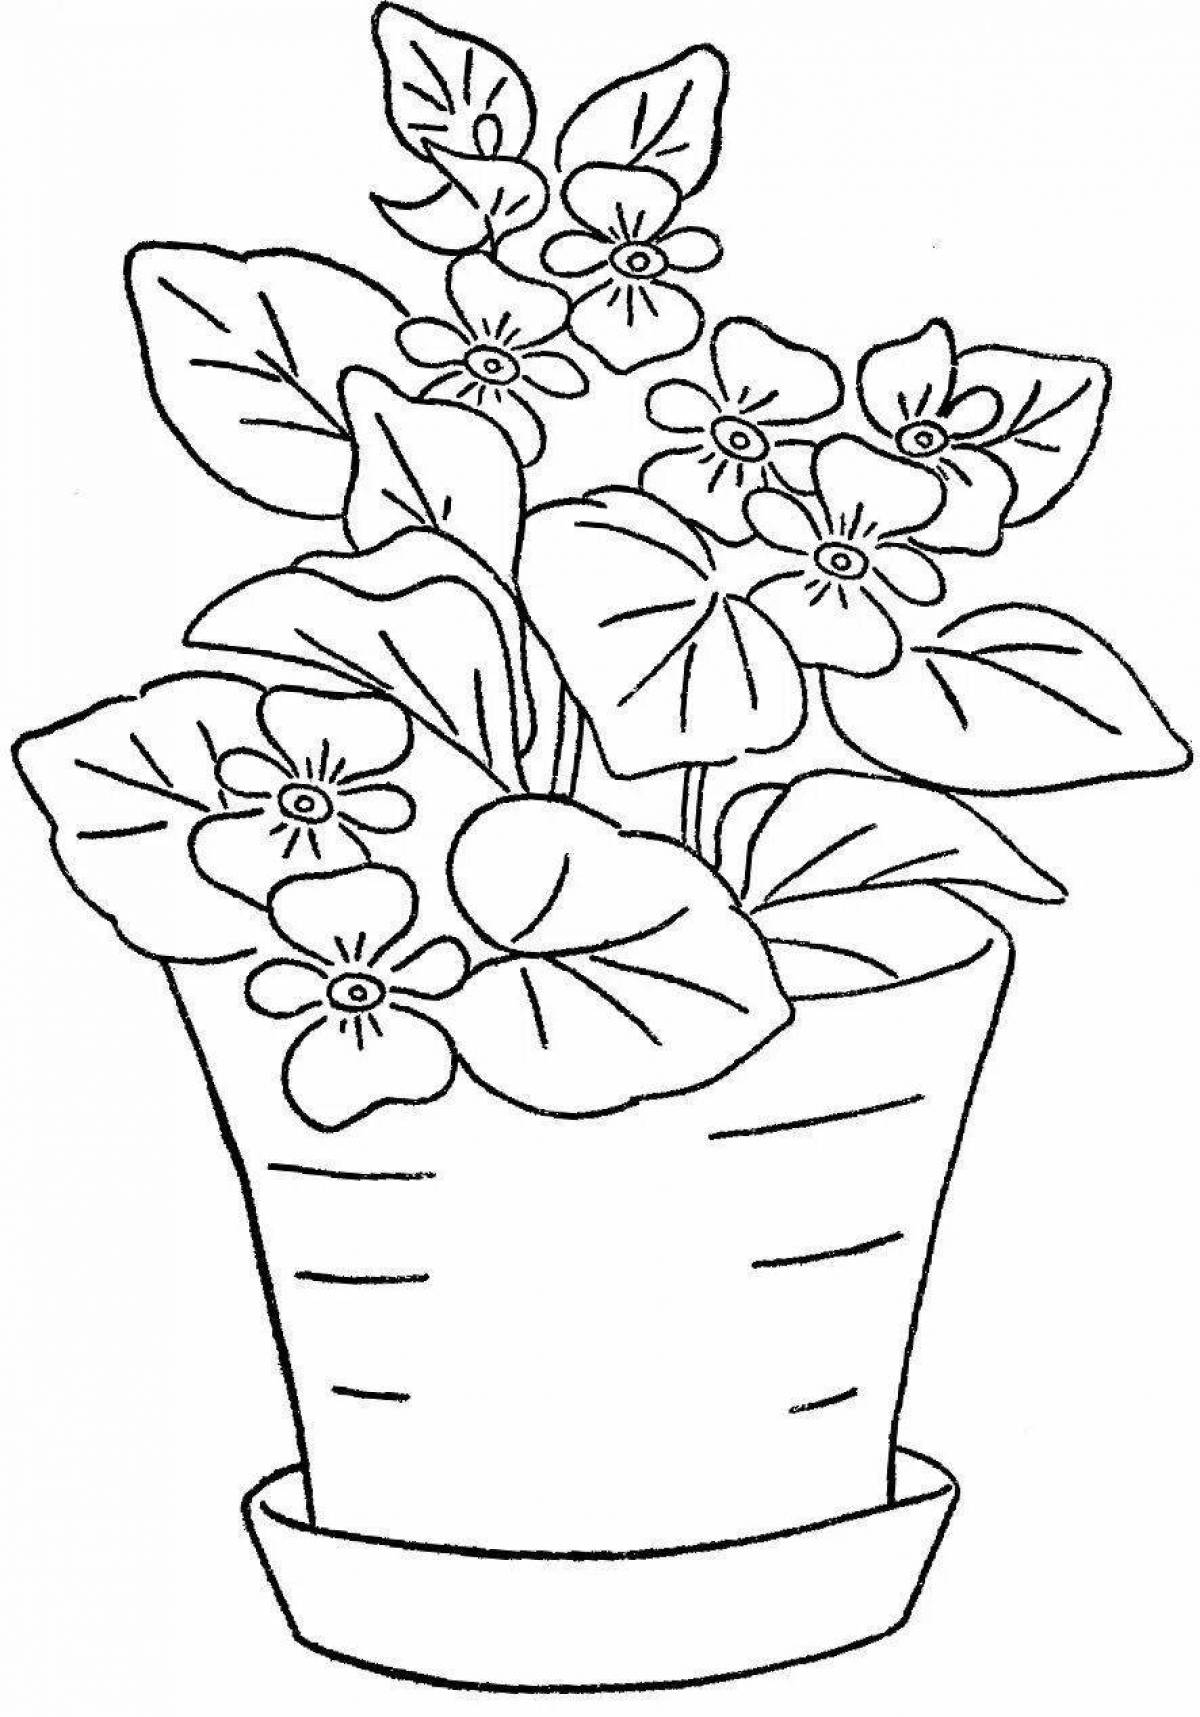 Fun coloring flower in a pot